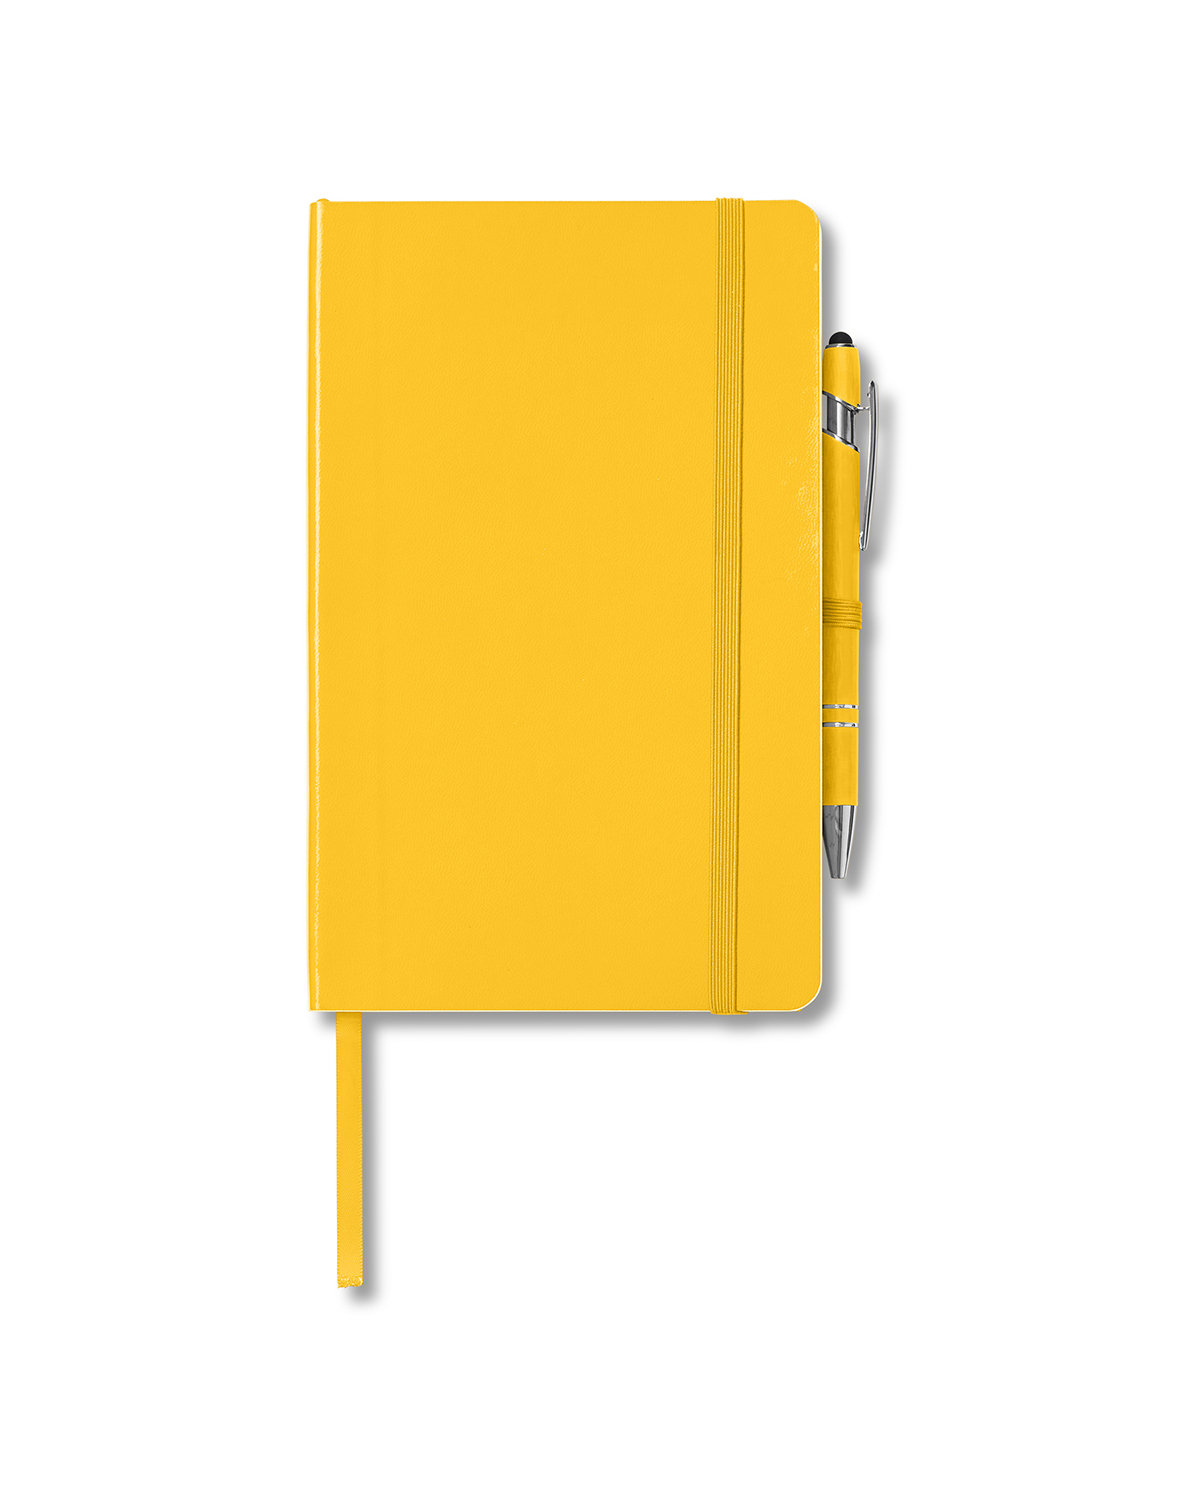 CORE365 Soft Cover Journal And Pen Set campus gold 